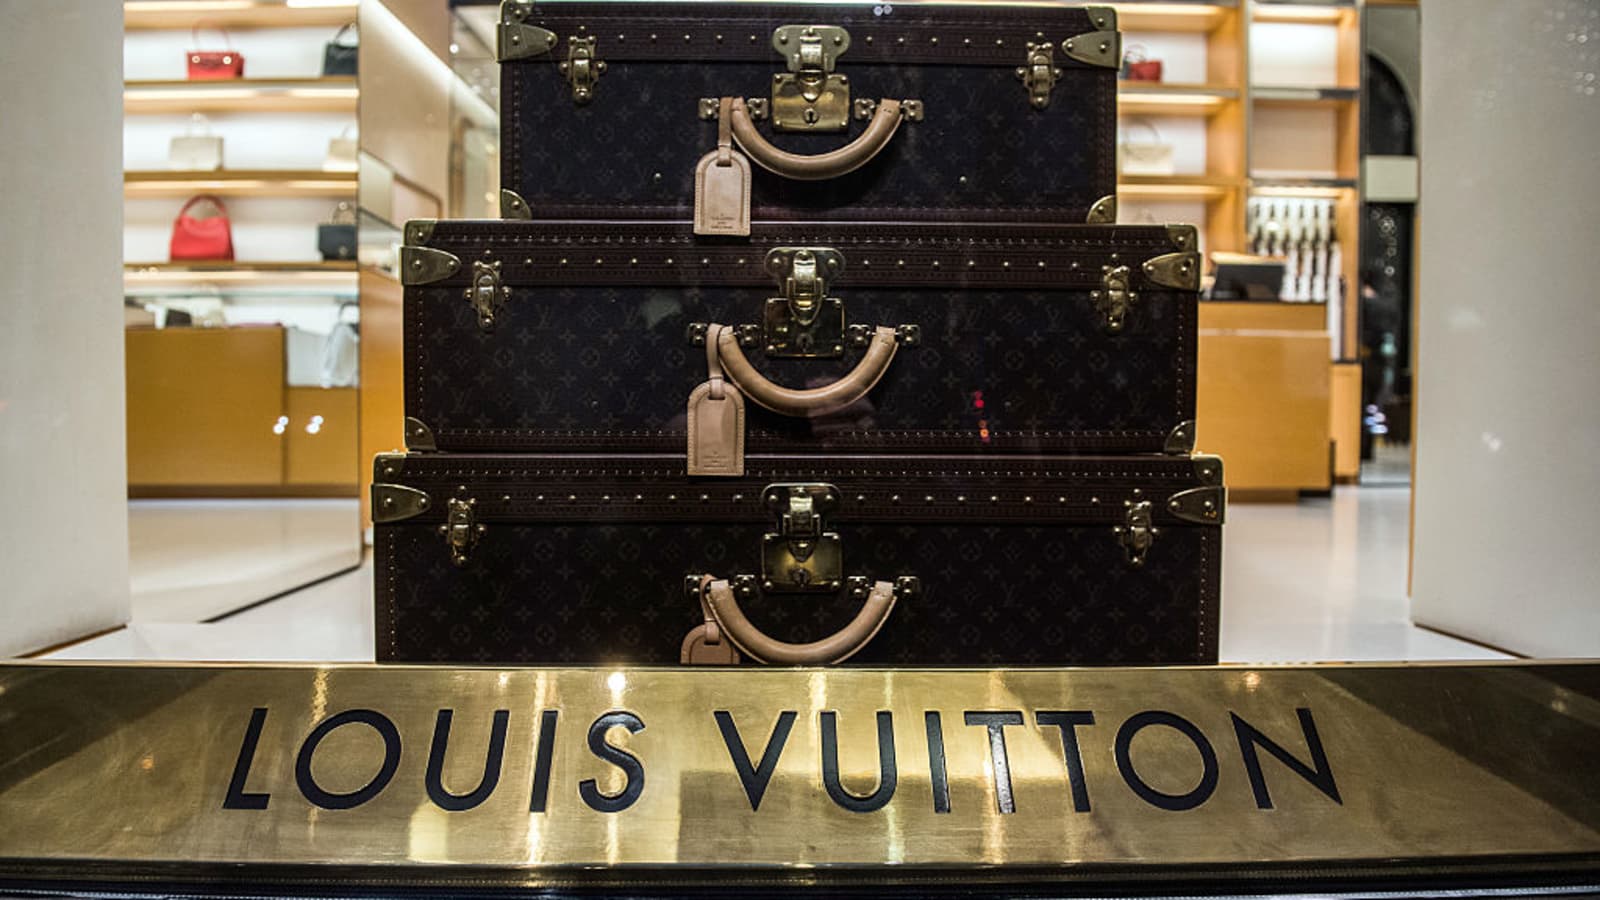 For the Price of a New Car, Louis Vuitton Is Selling an Airplane